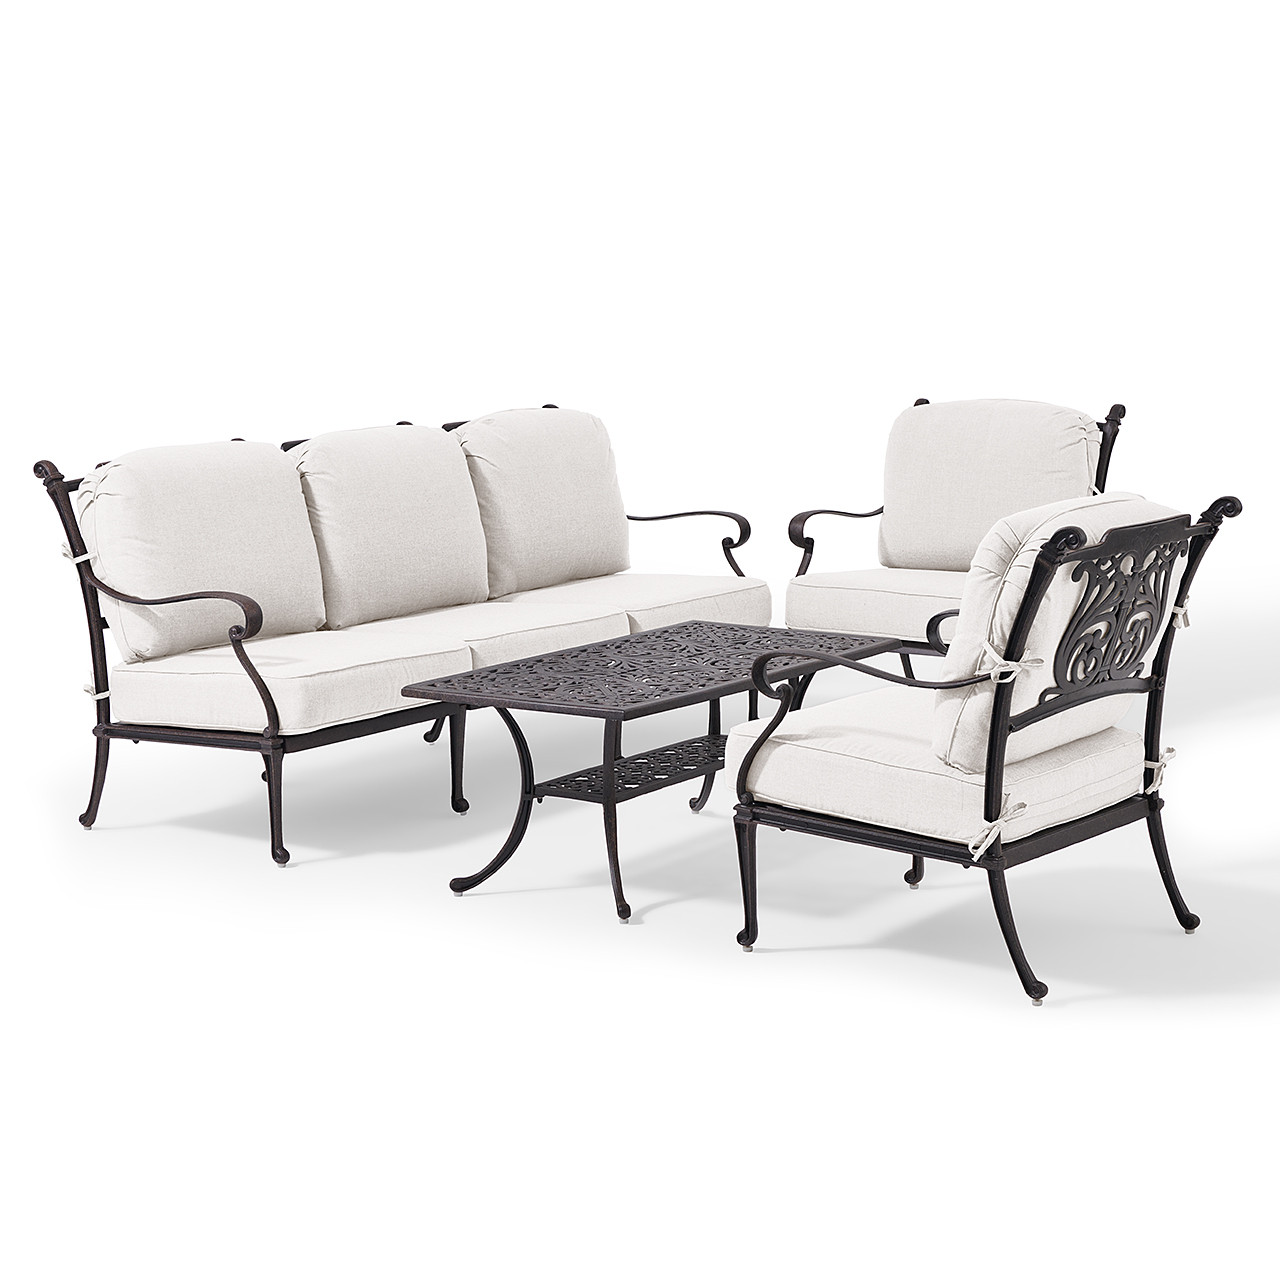 Naples Aged Bronze Cast Aluminum with Cushions 4 Pc. Sofa Group + Club Chairs + 45 x 24 in. Coffee Table